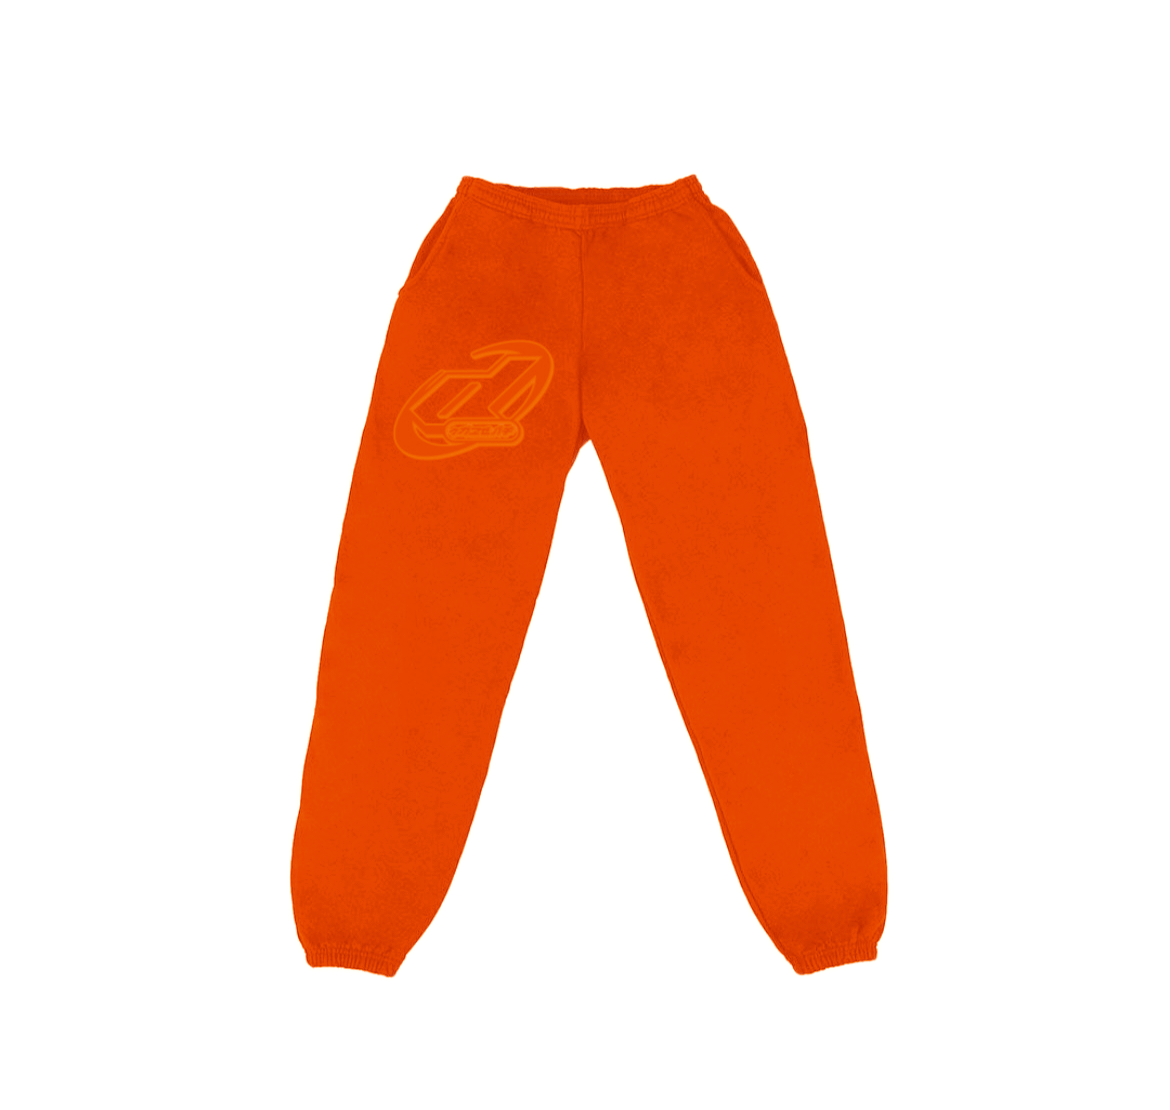 "The Lost World" Joggers